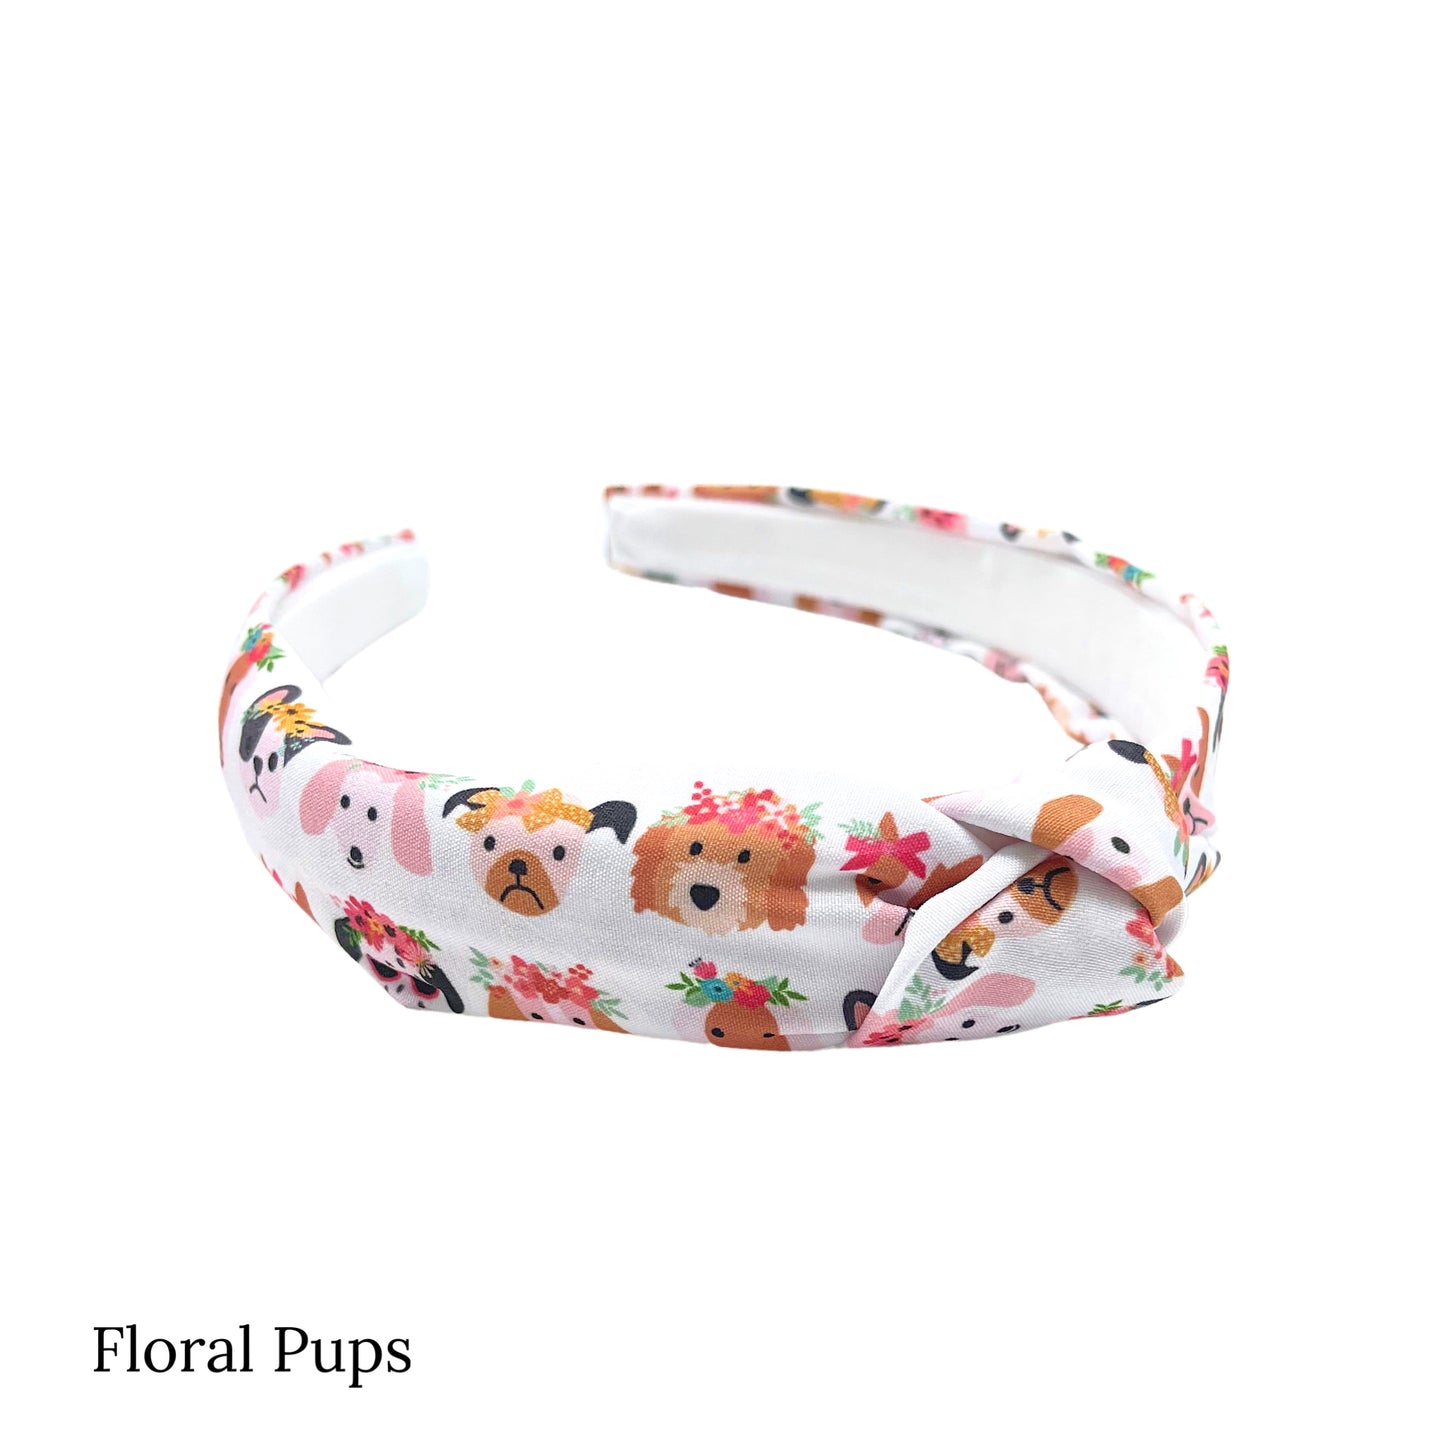 White fabric knotted headband with spring floral crown dogs pattern designed by Hey Cute Deisgn.